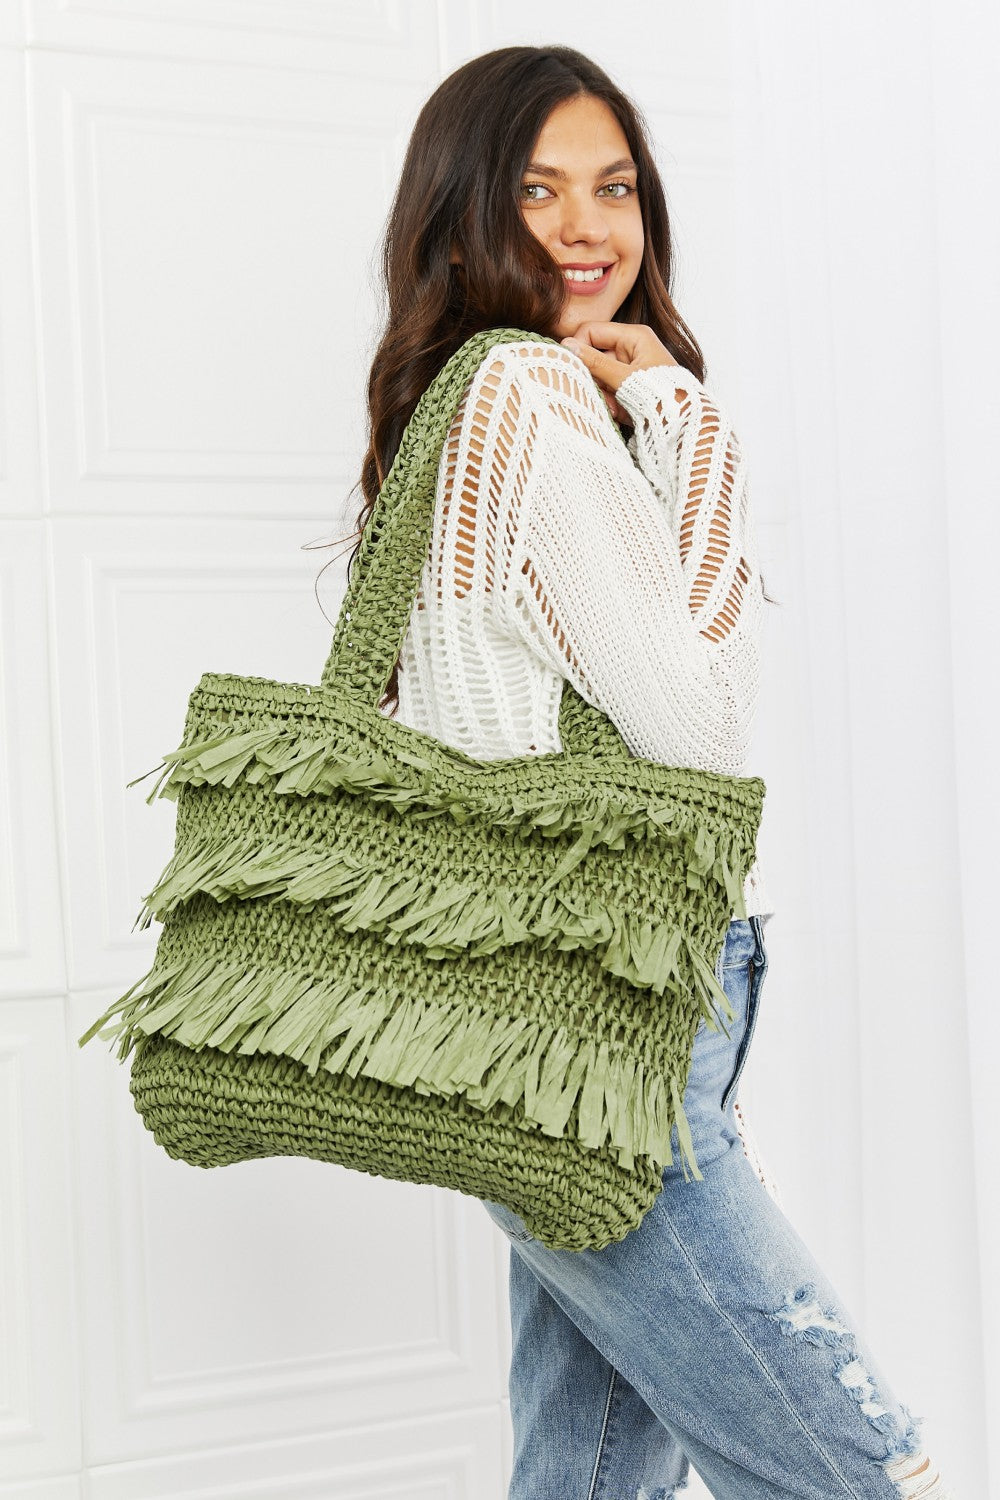 - Fame The Last Straw Fringe Straw Tote Bag - Ships from The US - Tote bags at TFC&H Co.